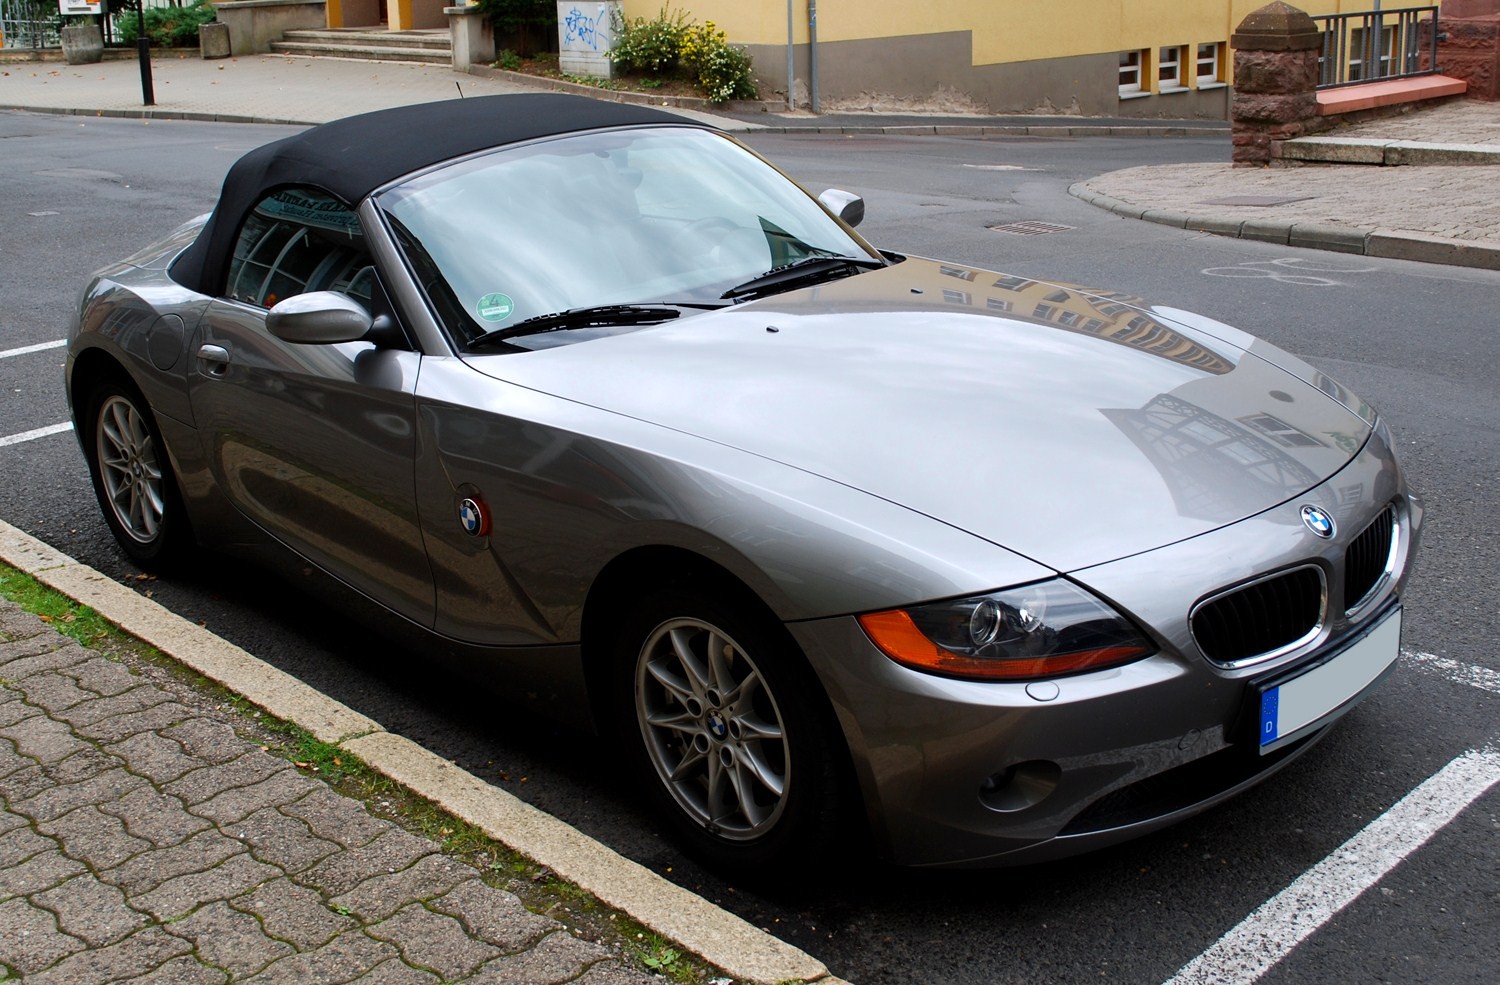 BMW launches new version of Z4 Roadster in India, starting price Rs 65 lakhs